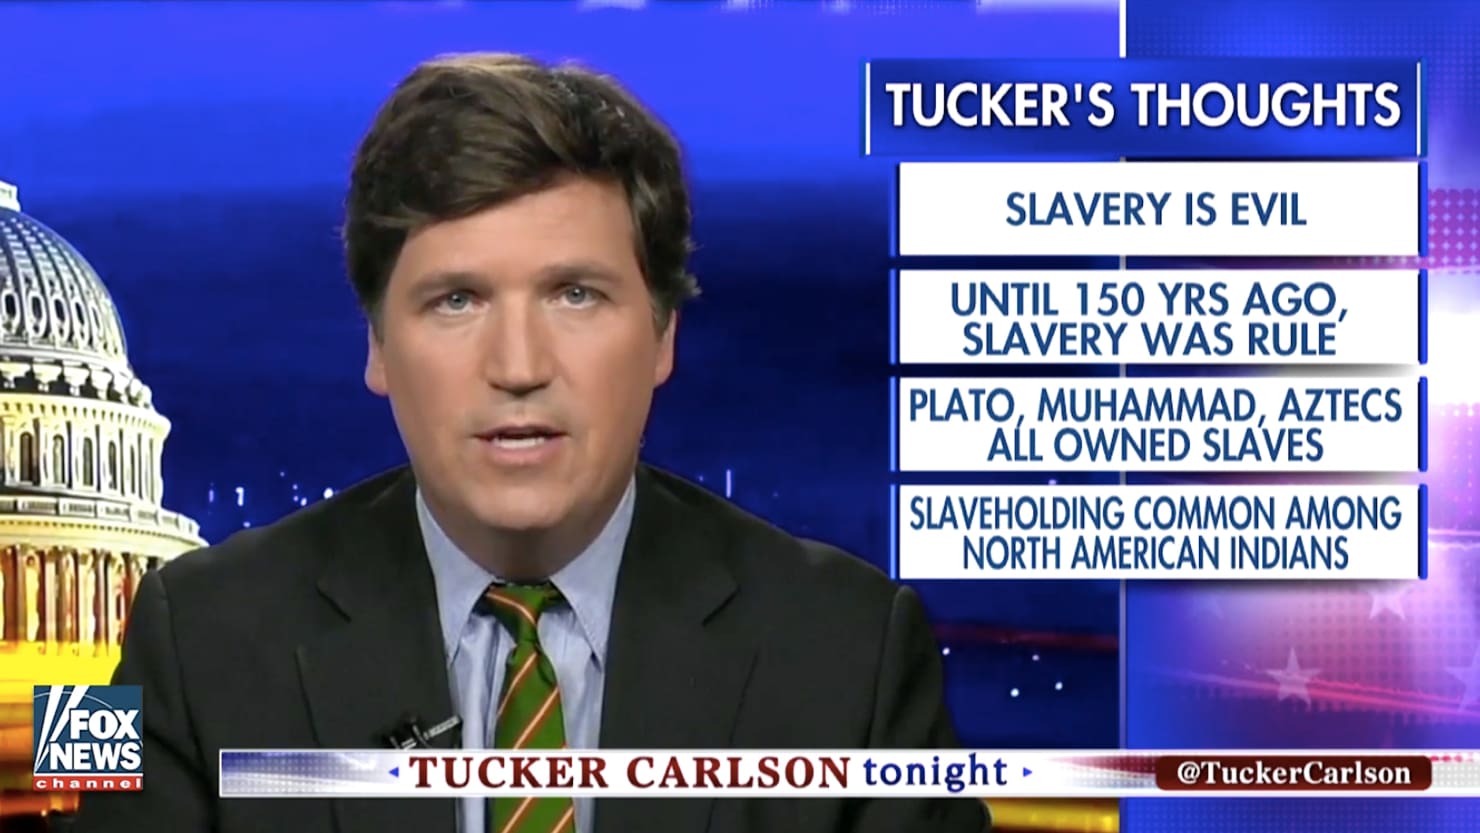 Tuckered Out:  Let’s Correct the Record on the History of Slavery and Abolition